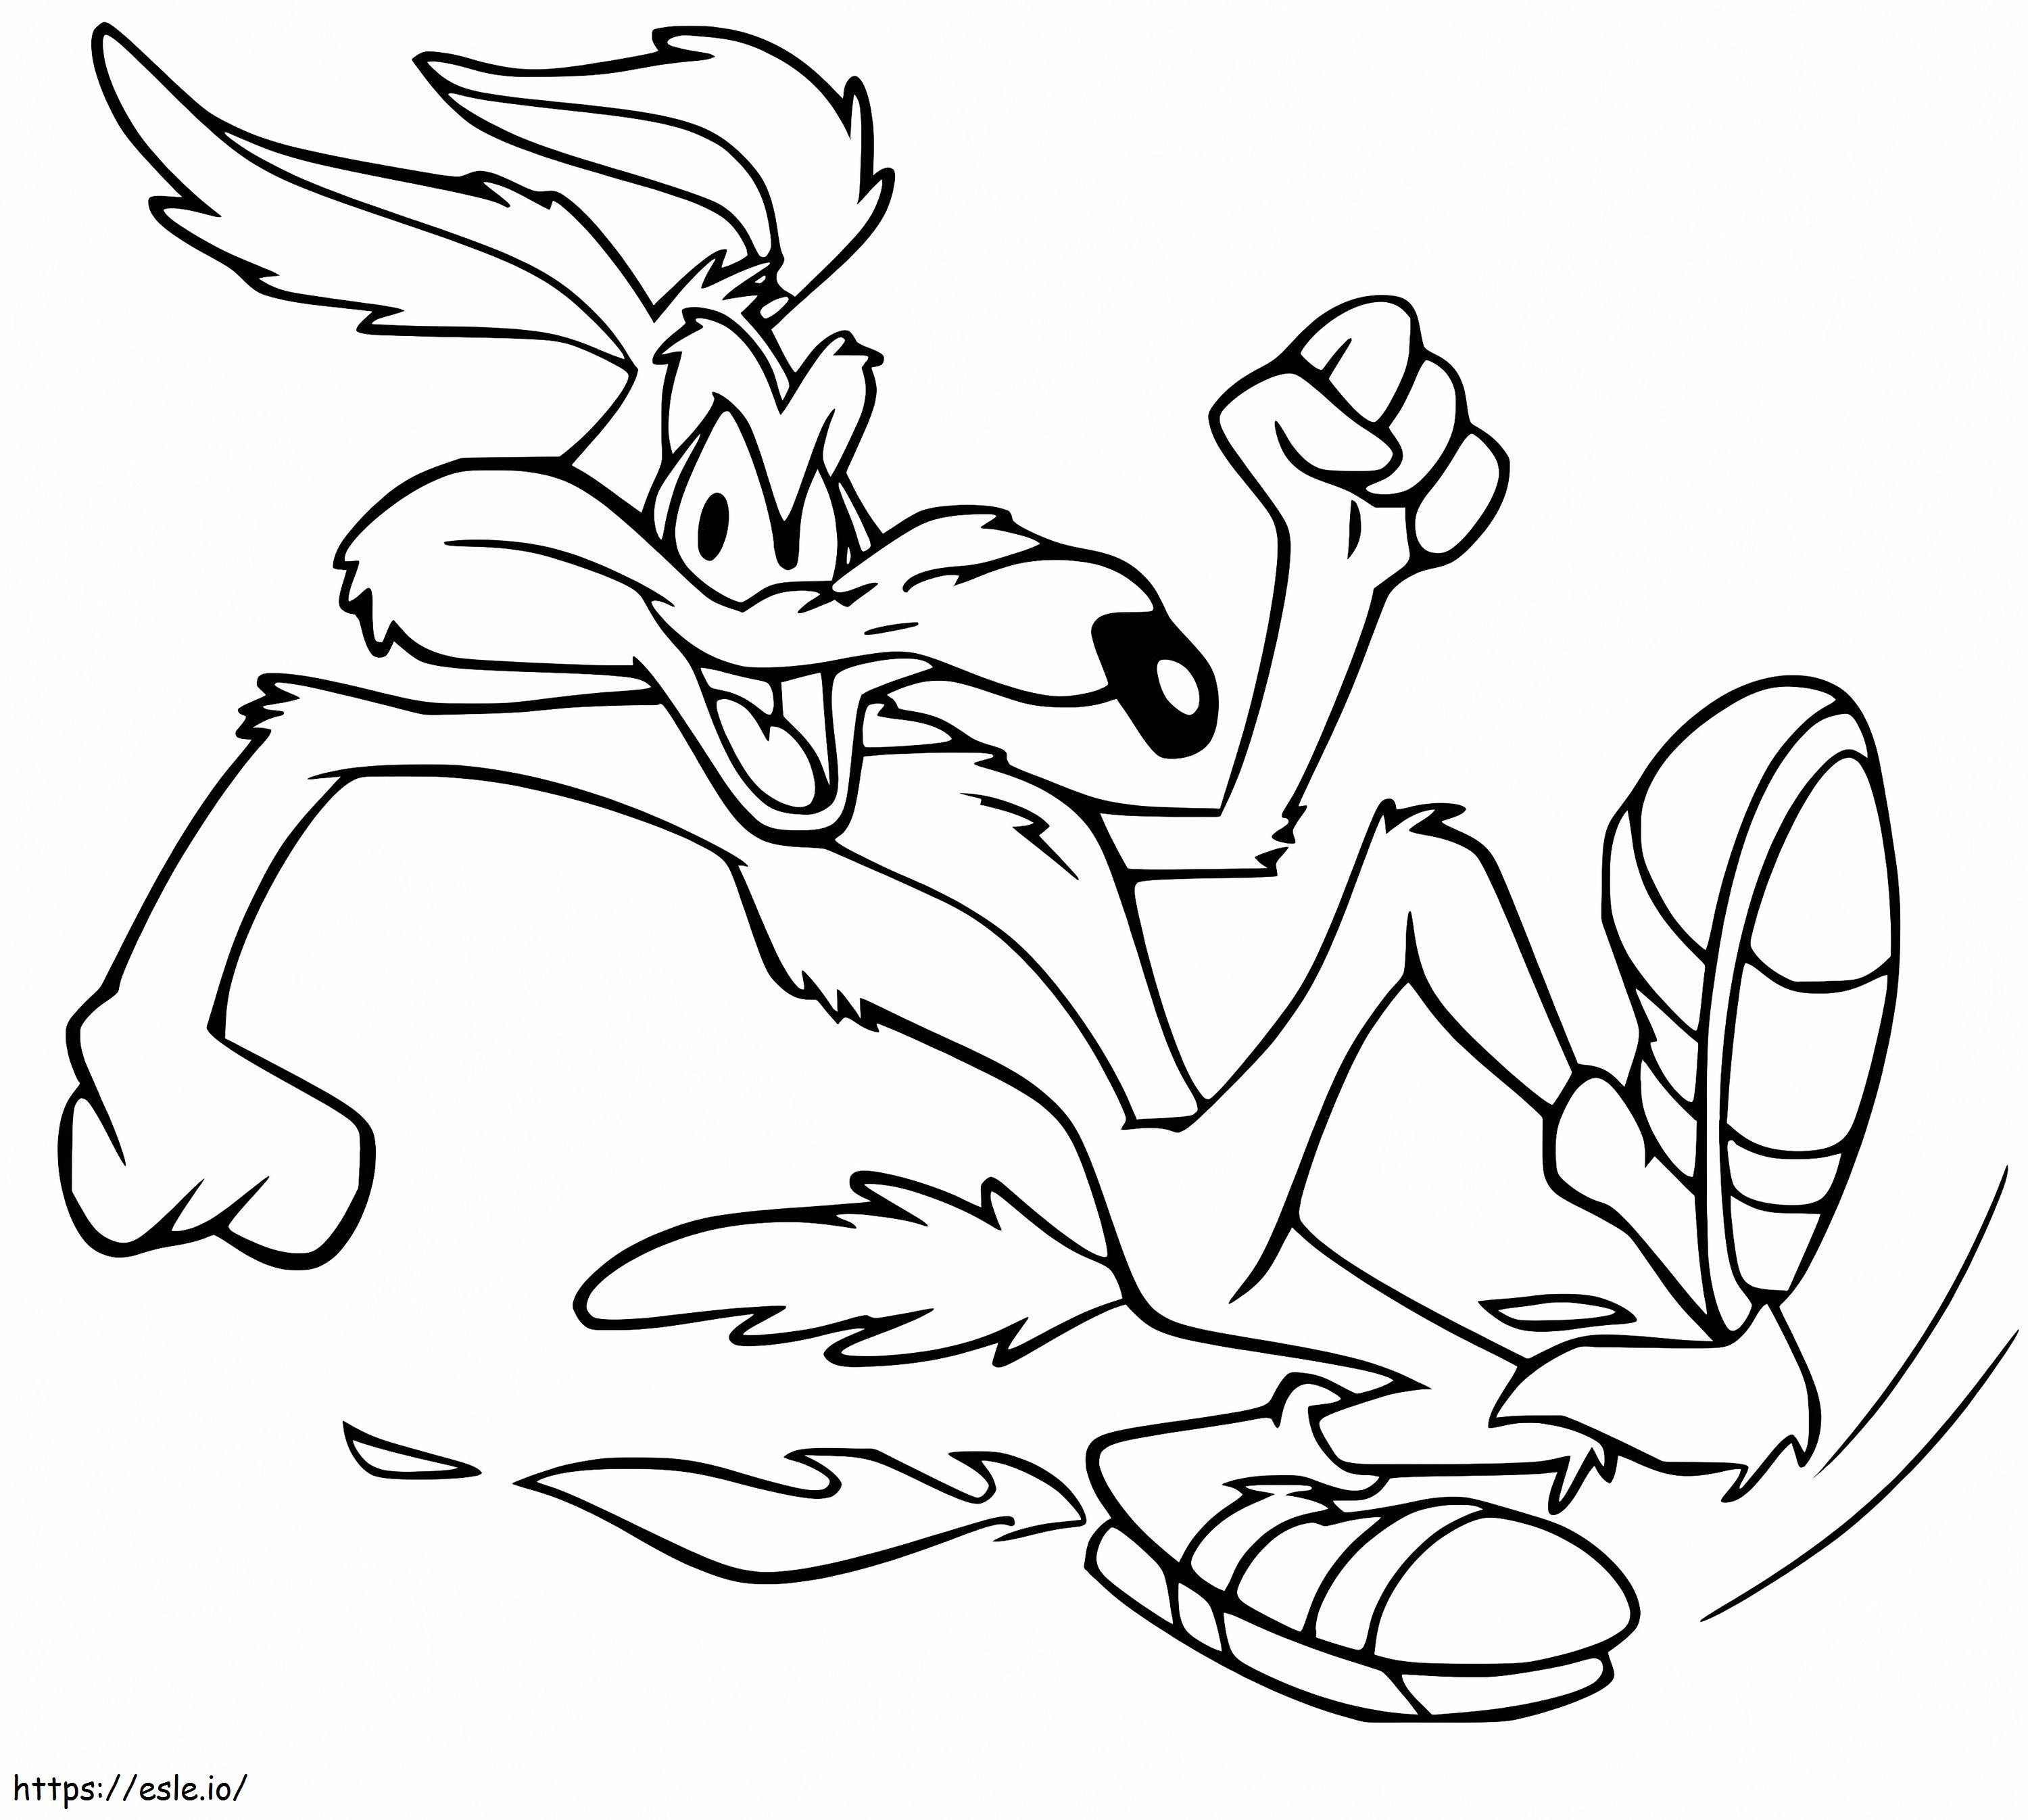 Wile E Coyote Is Running coloring page